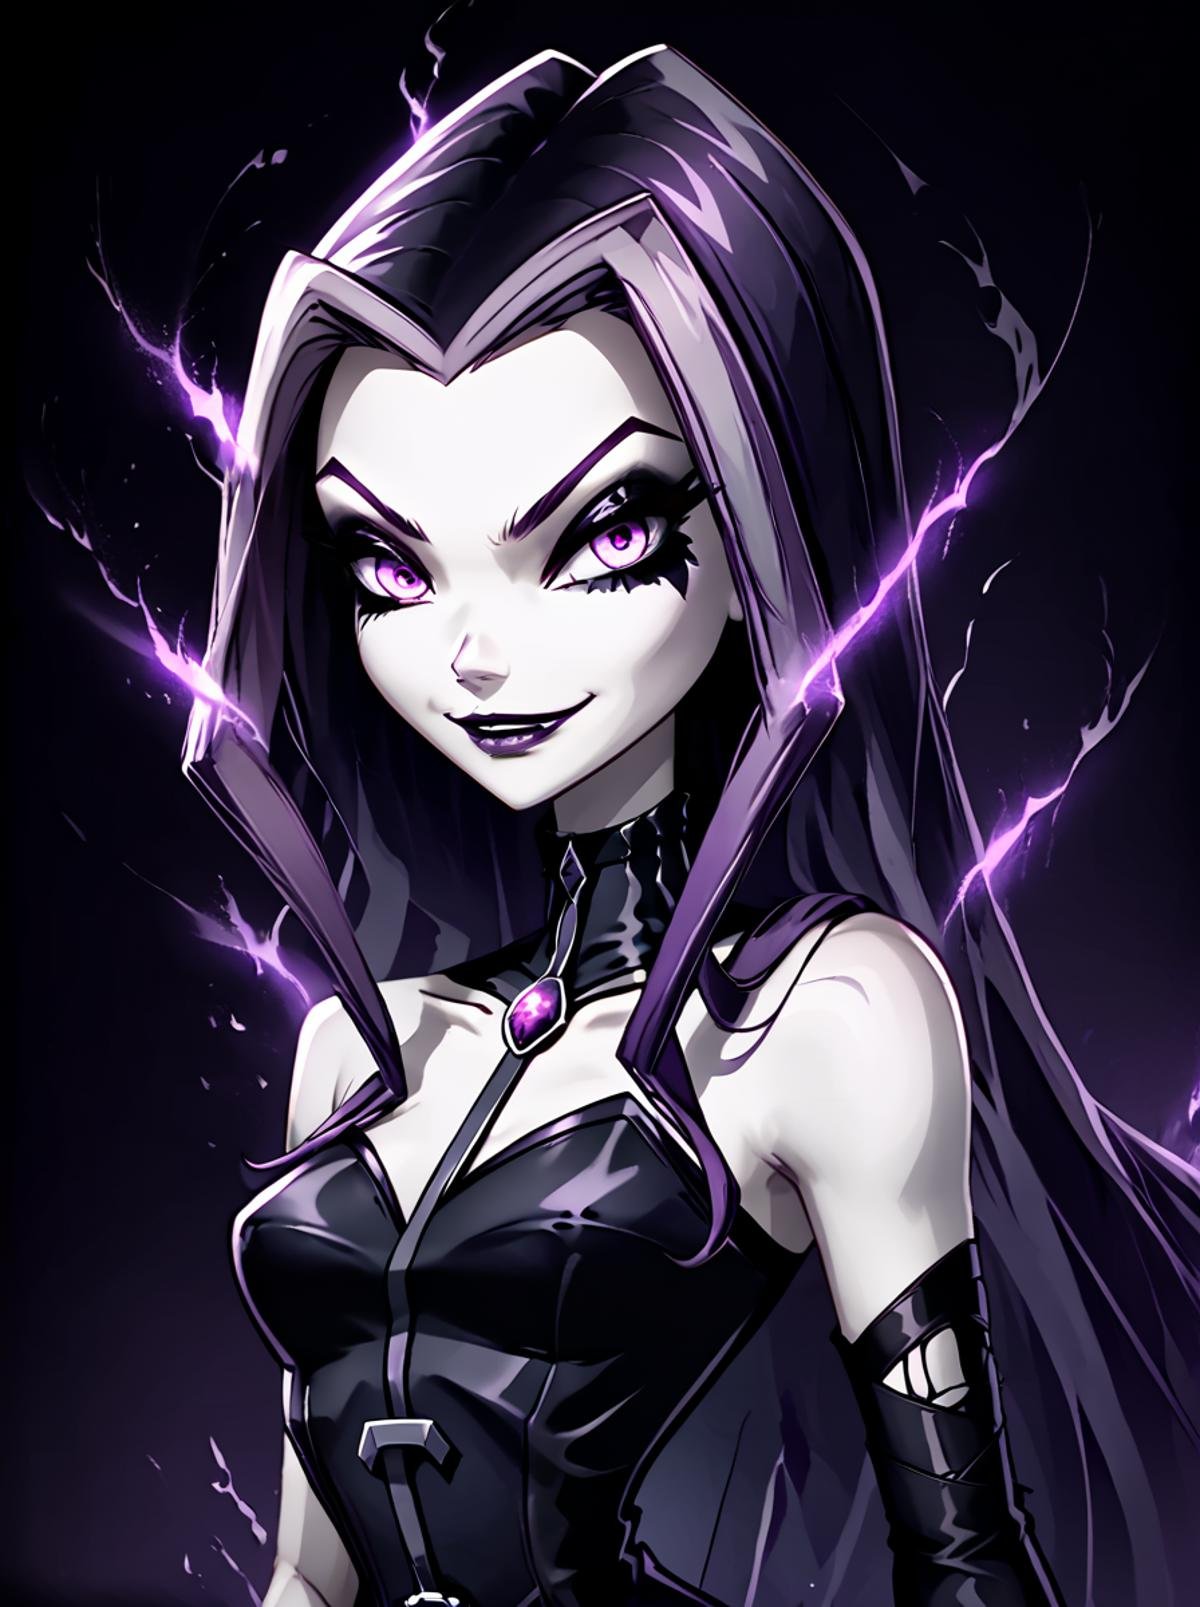 score_9, score_8_up, score_7_up, <lora:WinxAndTrixPony:0.8>,winxtrix,Darcy,1 girl, solo, long wavy dark purple hair, violet eyes, wearing a dark purple gothic outfit with a high collar, gothic style, slender build, mischievous smile, pale skin, mysterious aura, dark magic.,<lora:Ghotic_haunted_world:1>